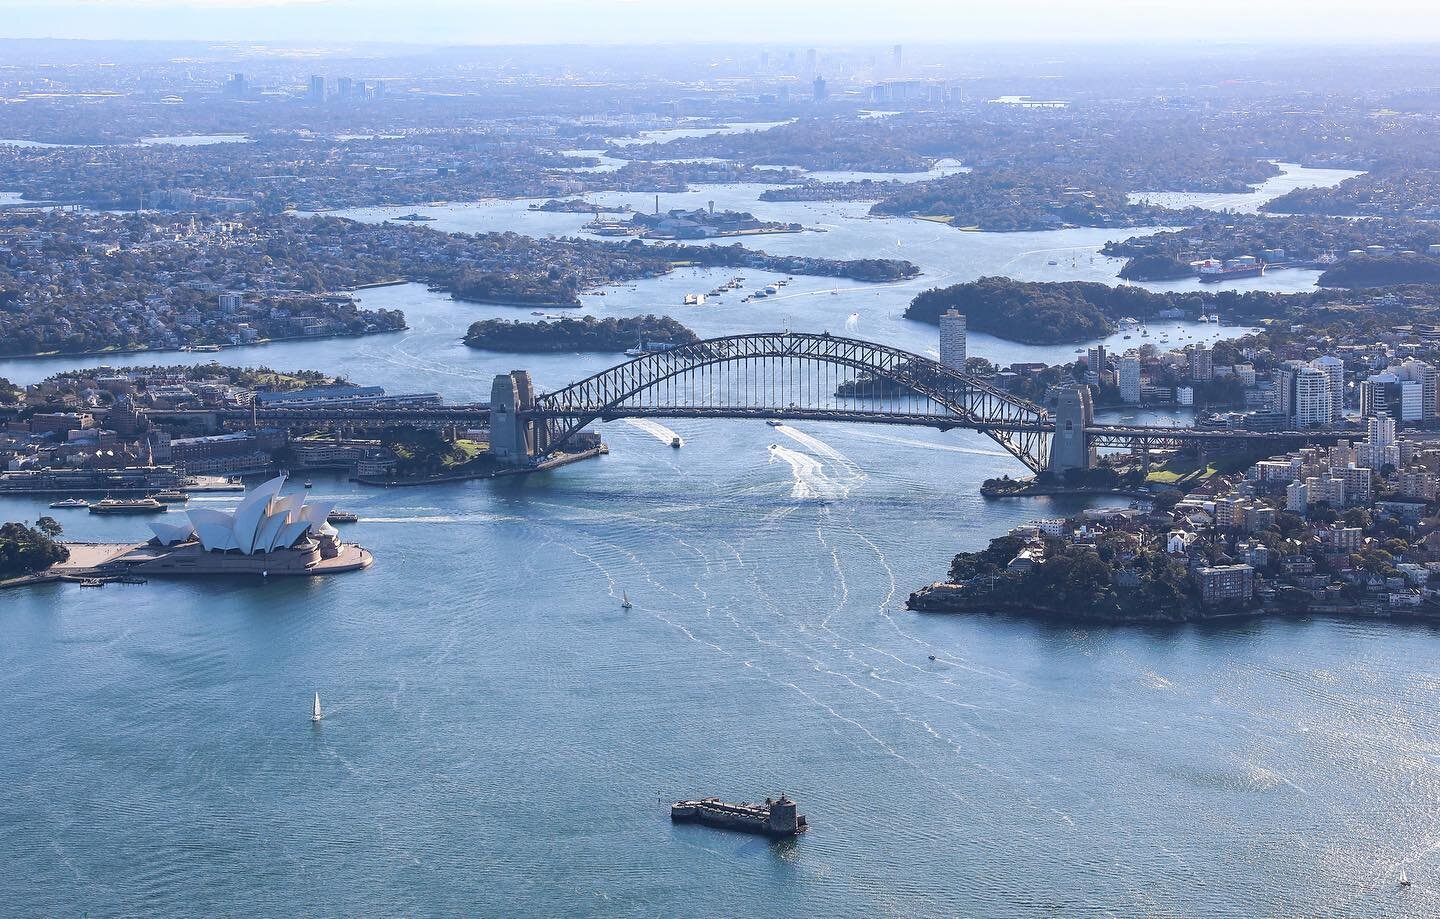 Have you ever experienced our beautiful city of Sydney from the sky? #flywithsteve and take in the magic that is a birds eye view ✨ @sydneybyseaplane 📸 @taligphotography